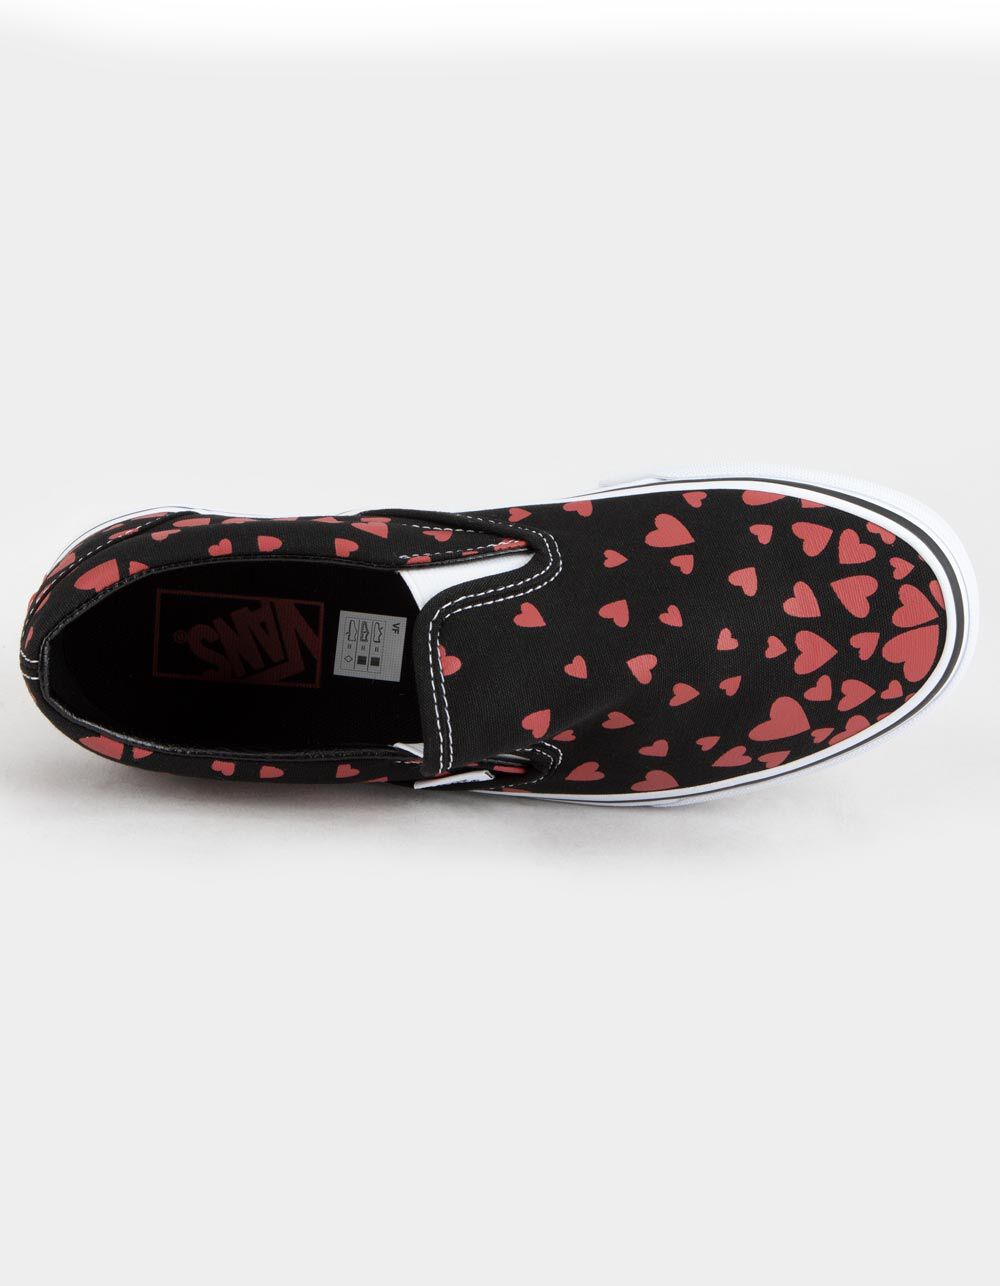 VANS Valentines Hearts Classic Slip-On Womens Shoes